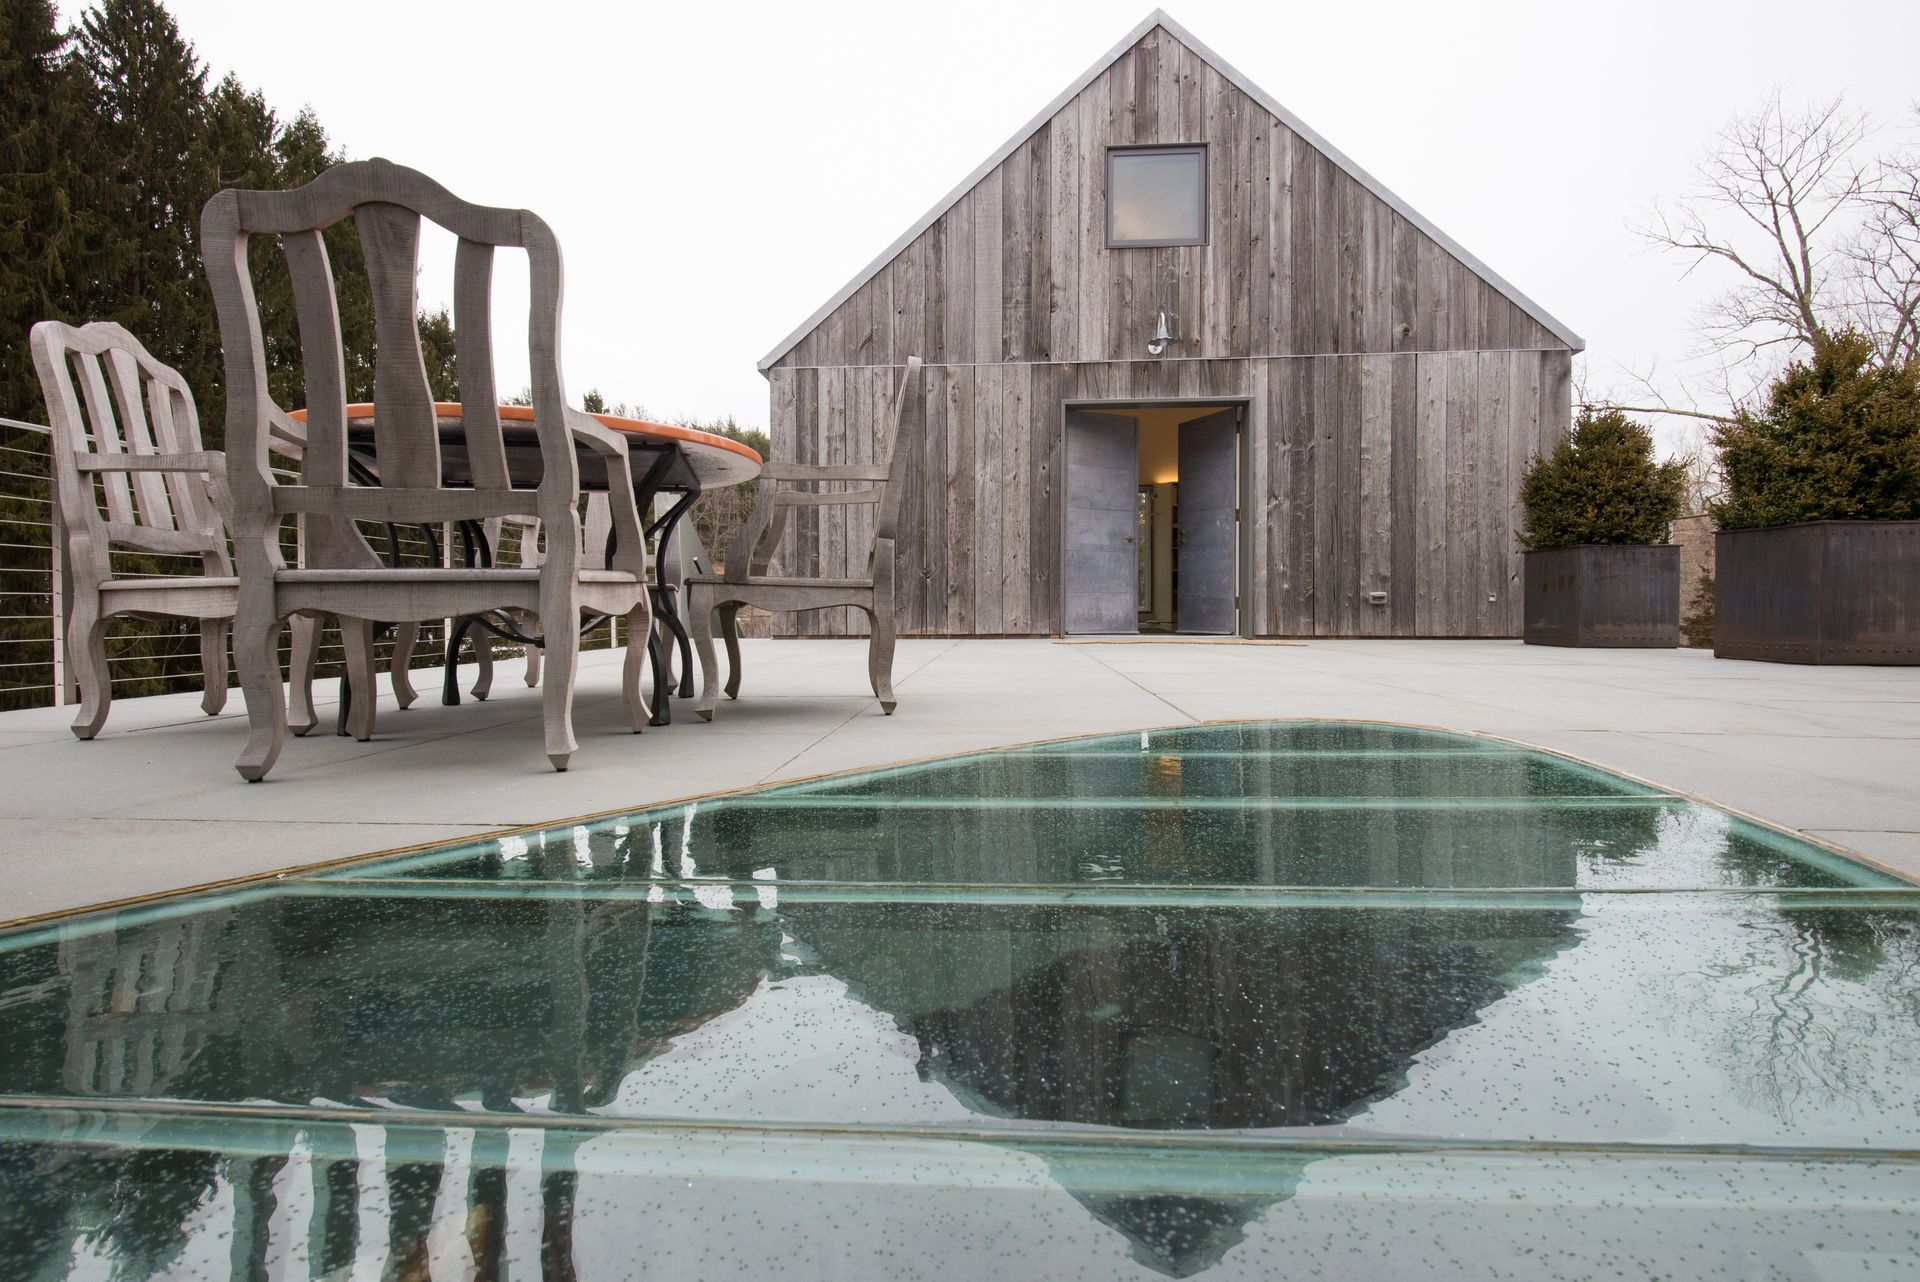 An outdoor glass floor revealing a space underneath.